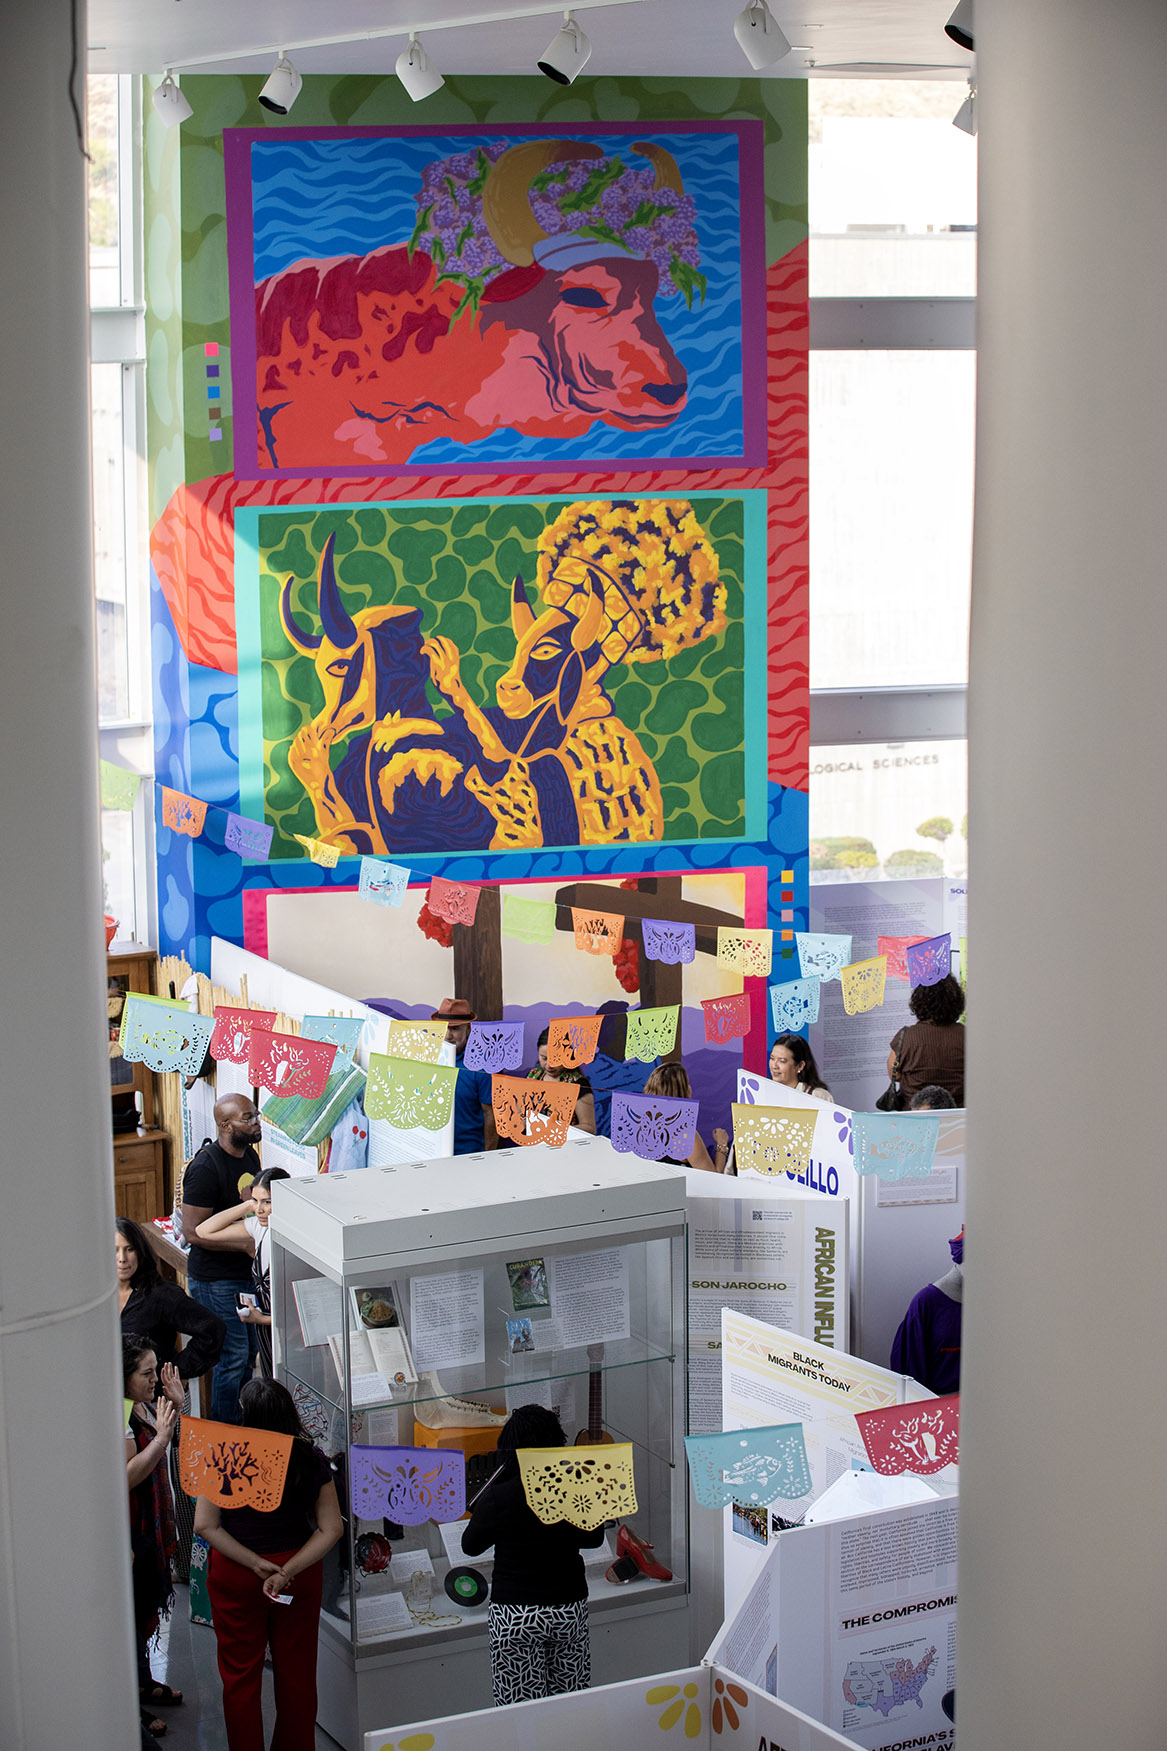 The mural painted by painted by Julio “Honter” Antuna Lopez looks over the Afróntalo exhibit at the CSUSB Anthropology Museum